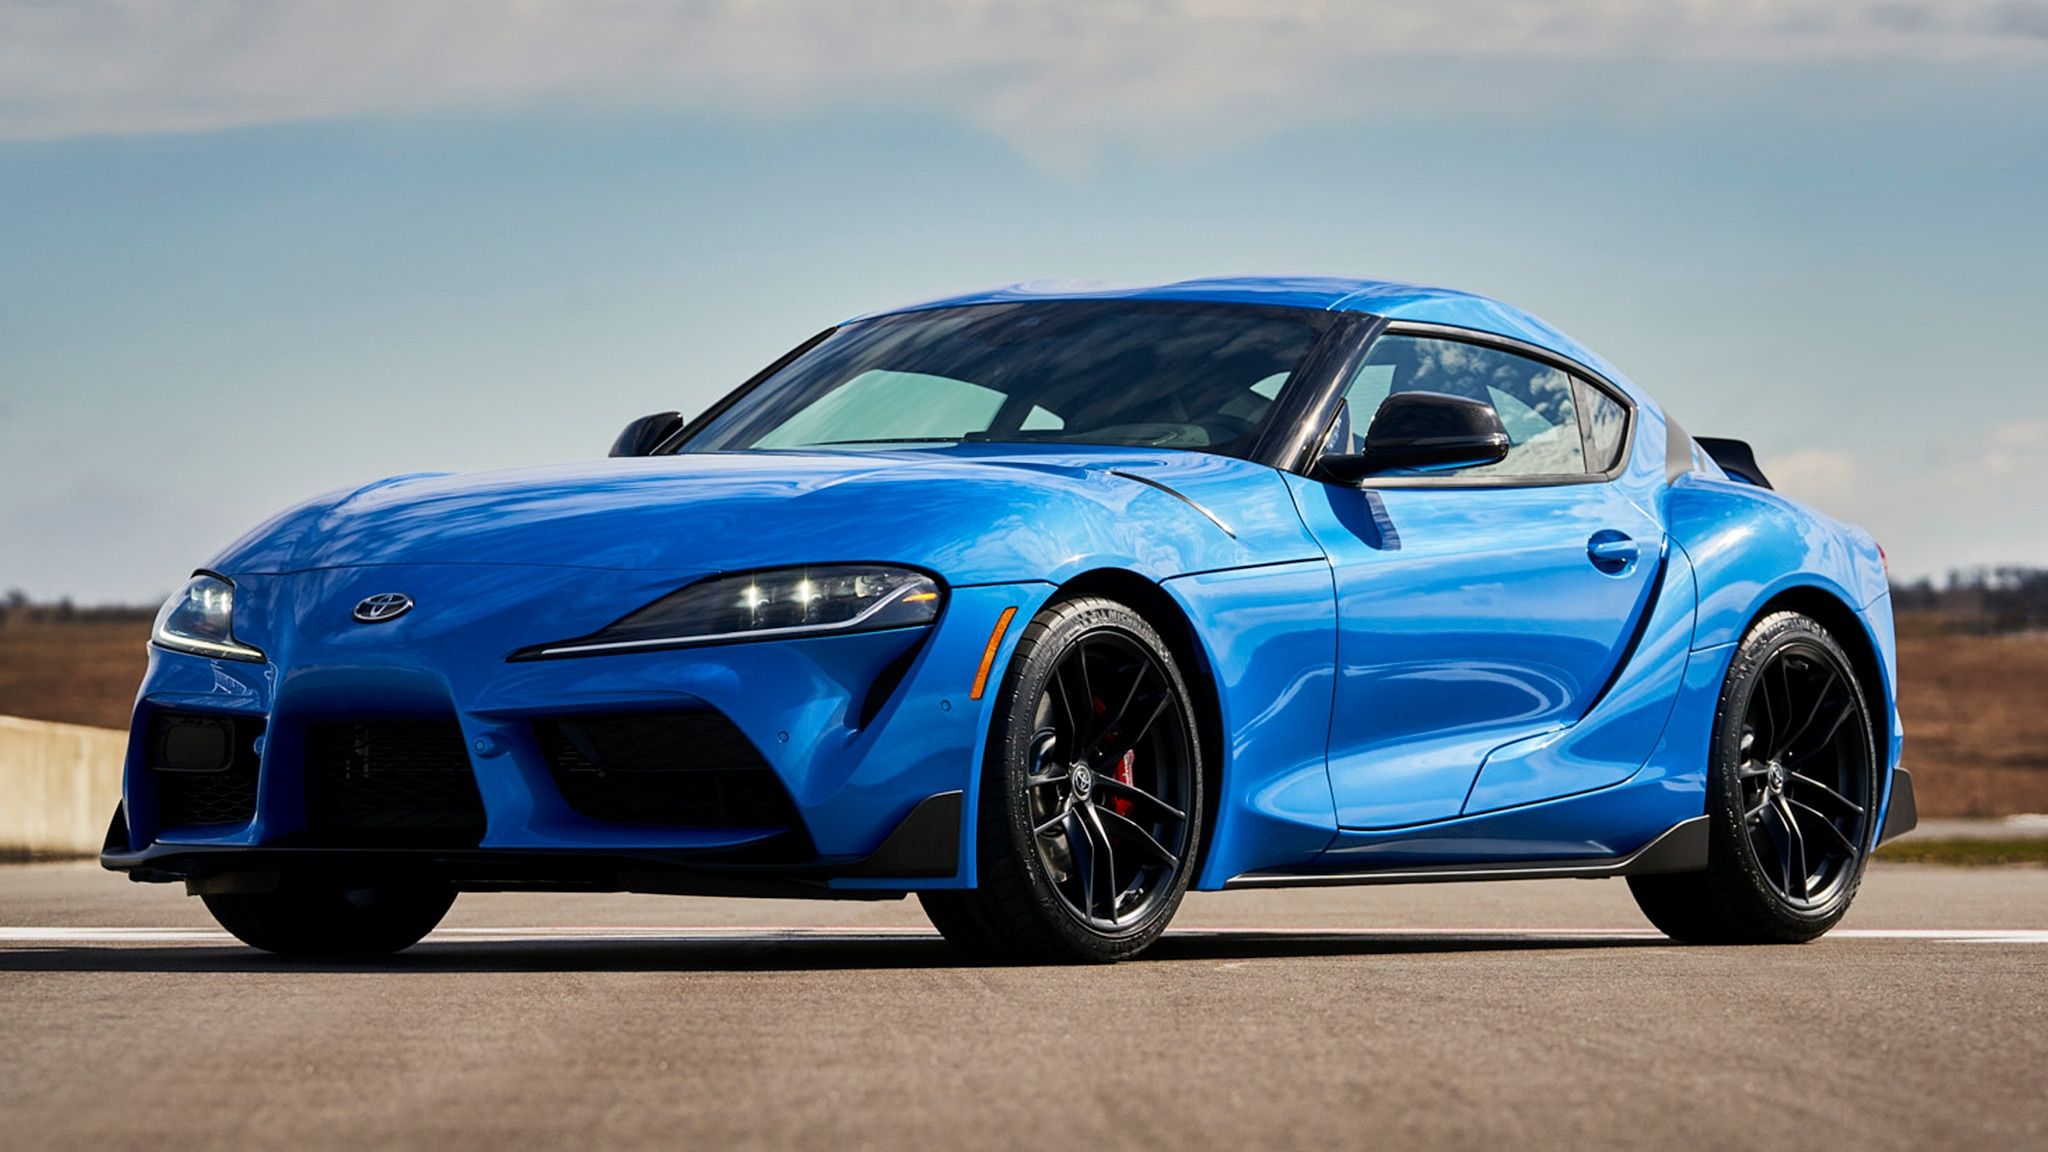 Toyota Supra A91 Edition First Look: What Makes It Special Er